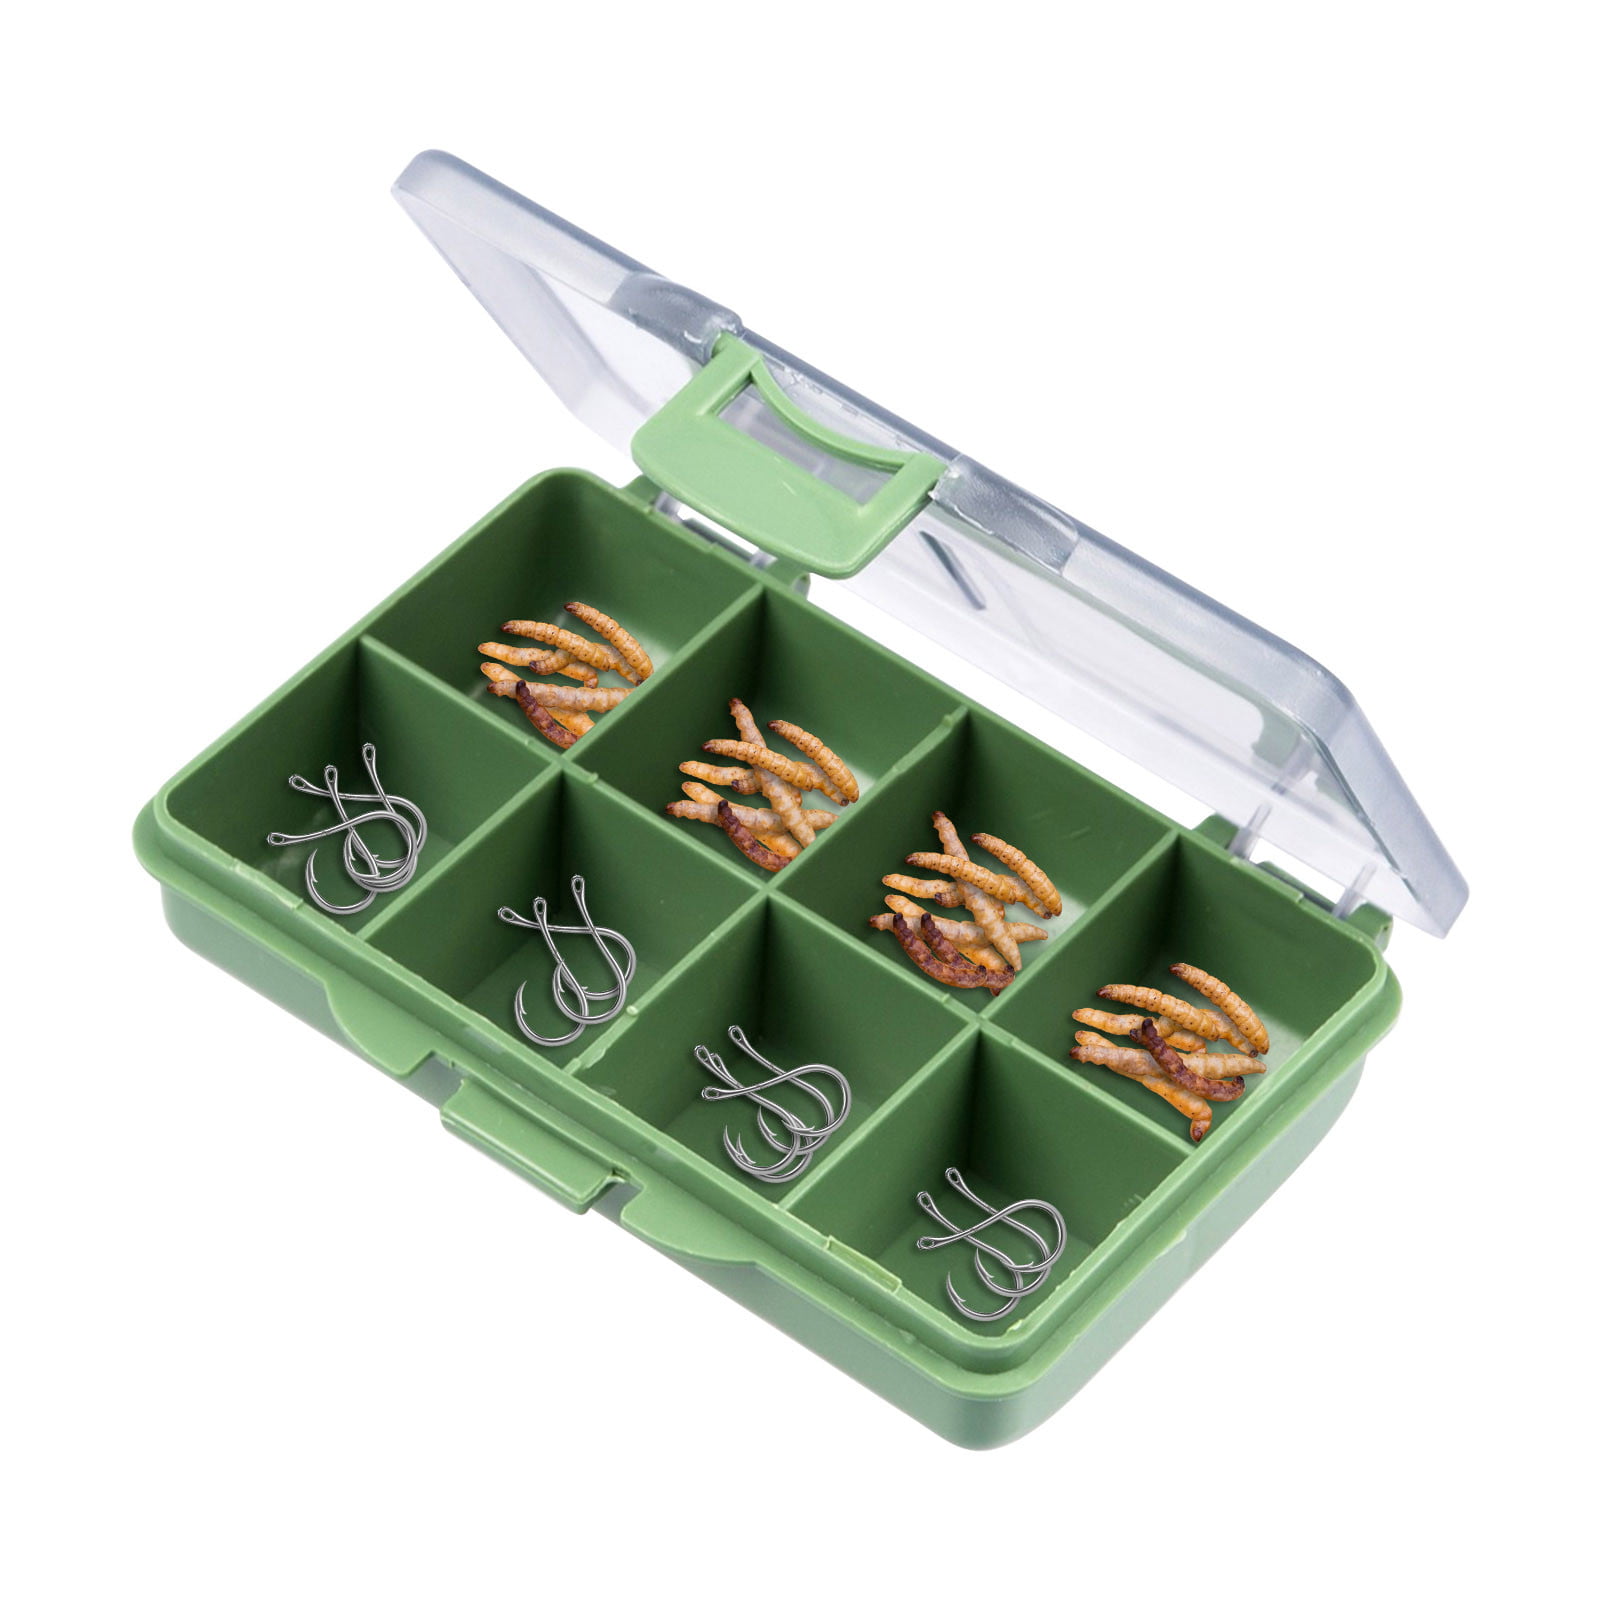 SDJMa Small Clear Visible Plastic Fishing Tackle Accessory Box Fishing Lure  Bait Hooks Storage Box Case Container Organizer Box 